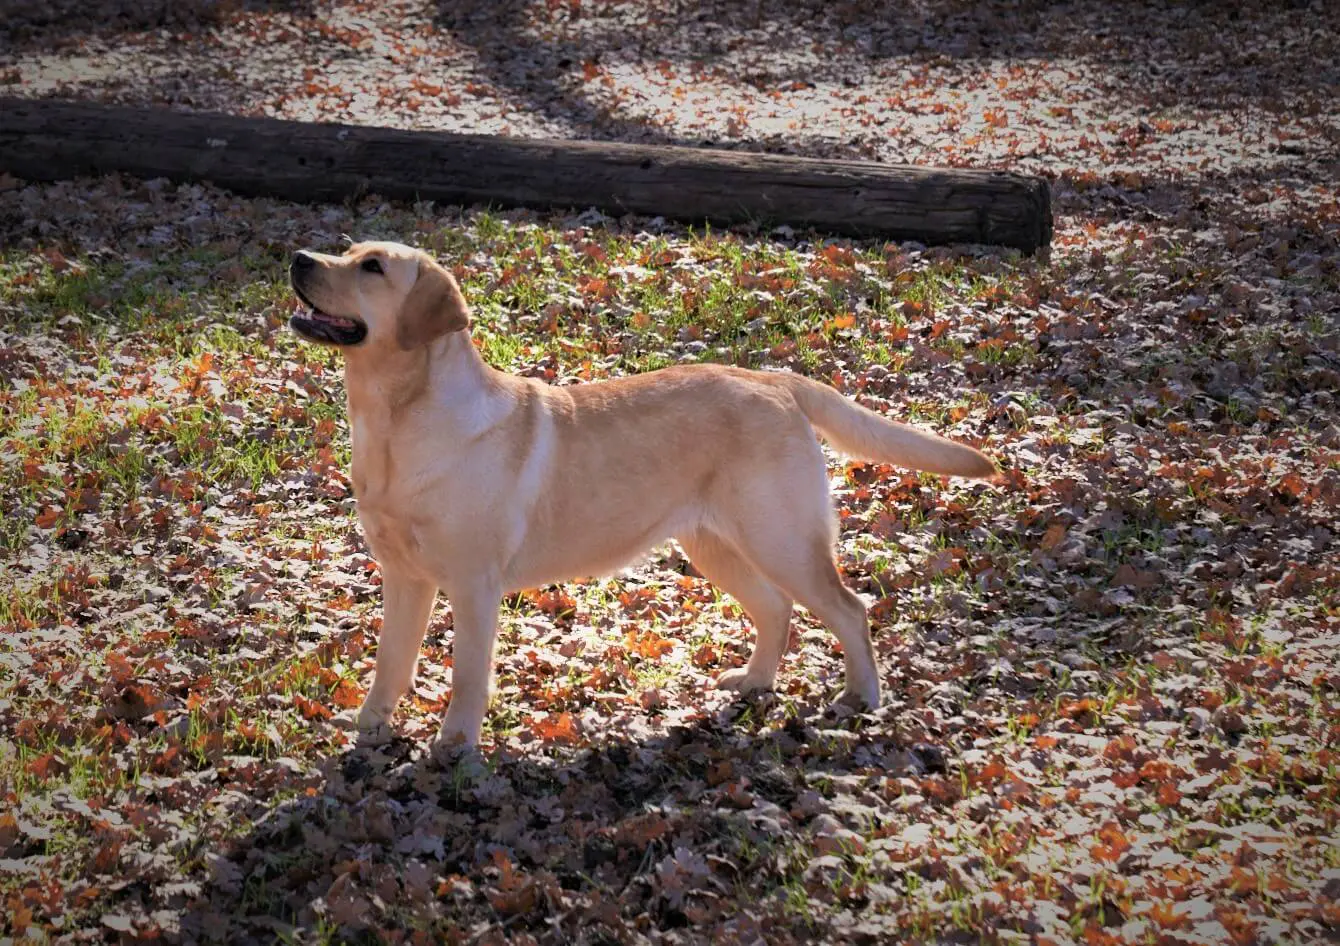 A dog standing in the leaves on the ground.